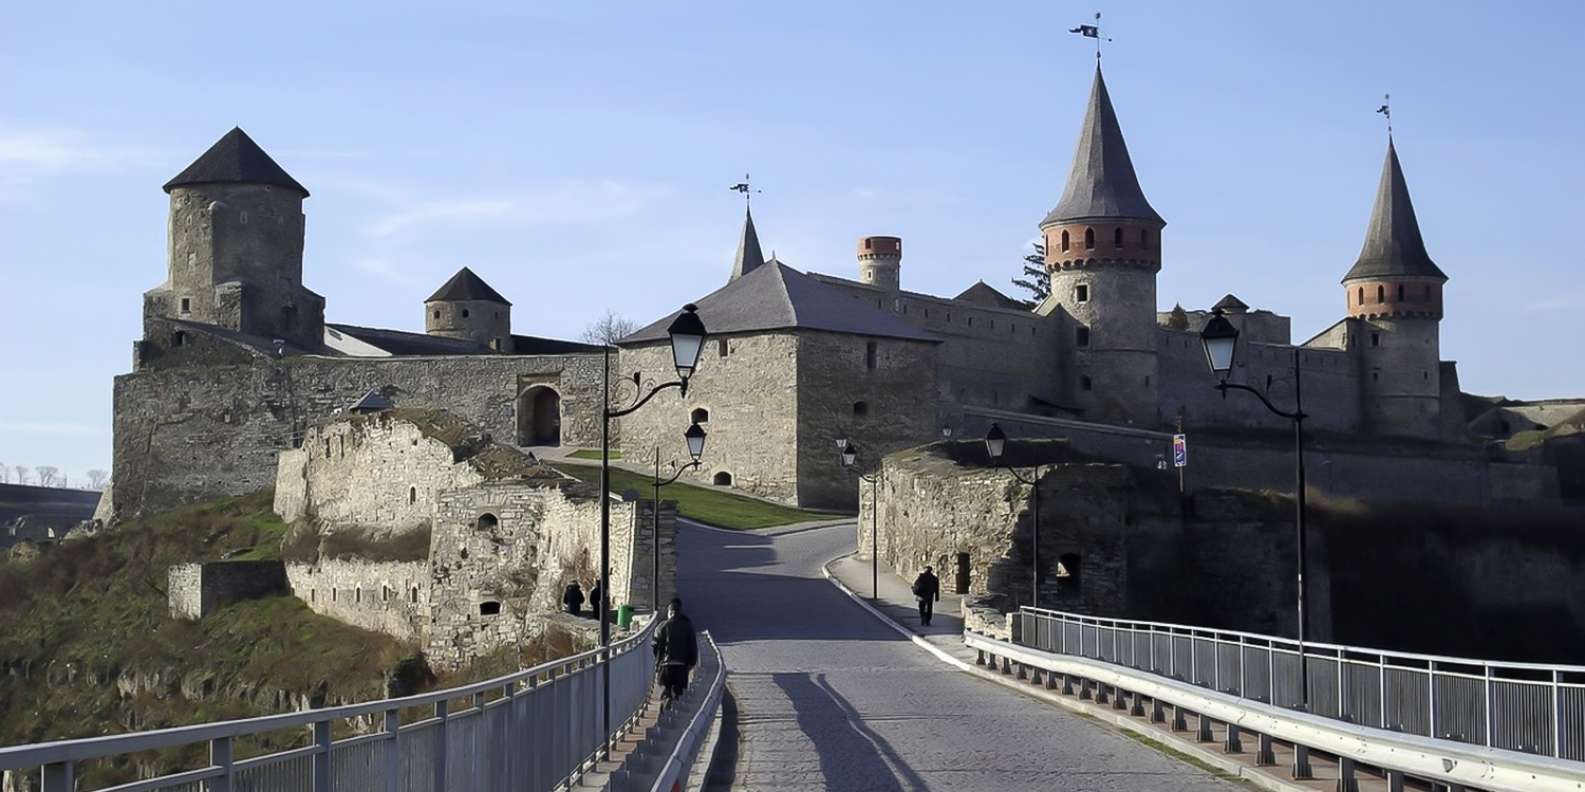 What to do in Kamianets-Podilskyi